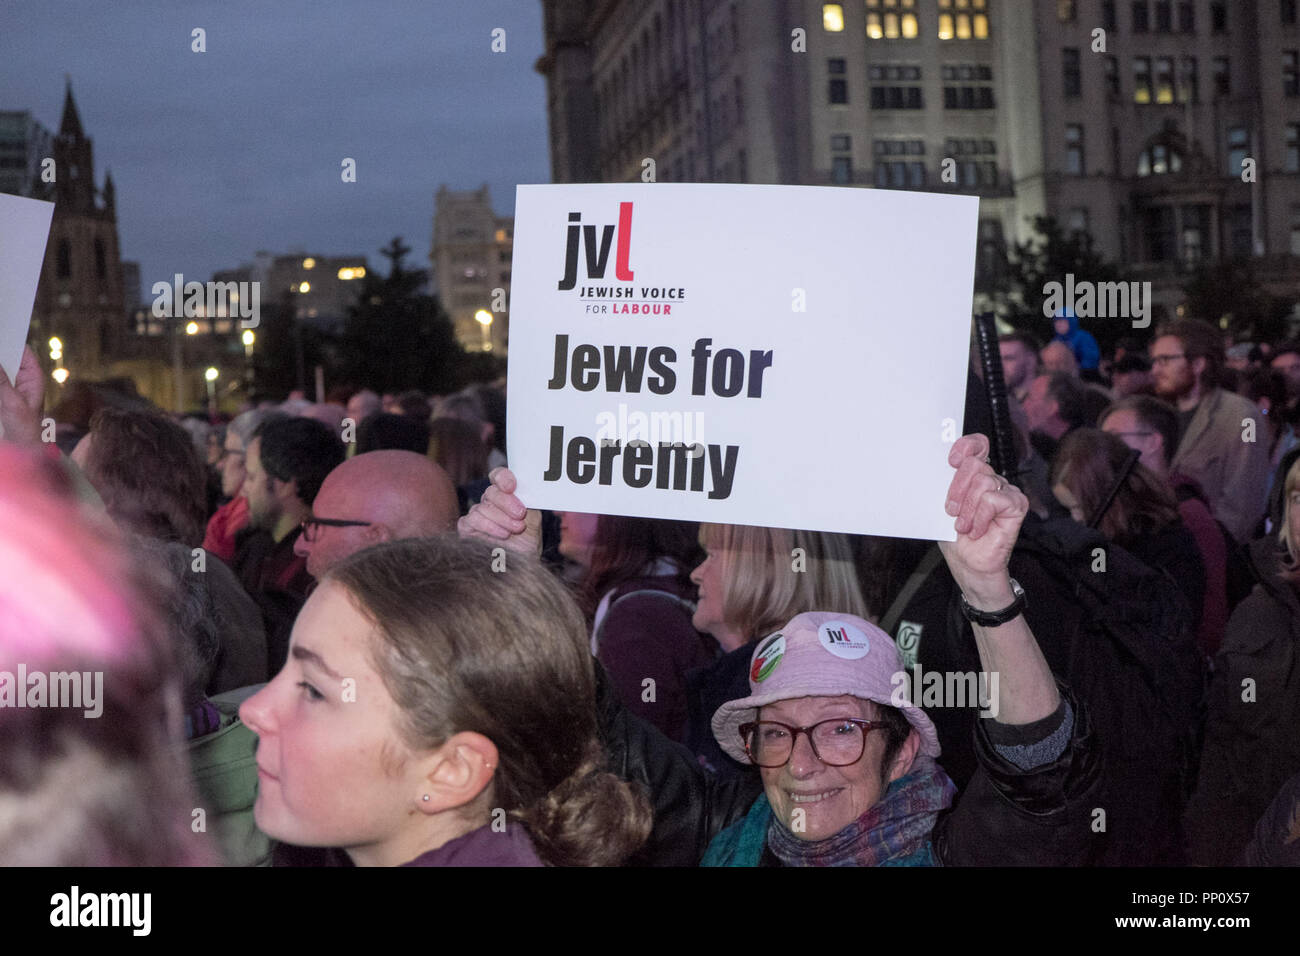 Liverpool, UK. 22 September 2018. A pre-conference public gathering at Pier Head with music and speeches by John McDonnell and Jeremy Corbyn.Labour Party Conference in Liverpool,UK. Large number of Stop,Anti Brexit,pro Europe,European supporters in attendance. Credit: Paul Quayle/Alamy Live News Stock Photo